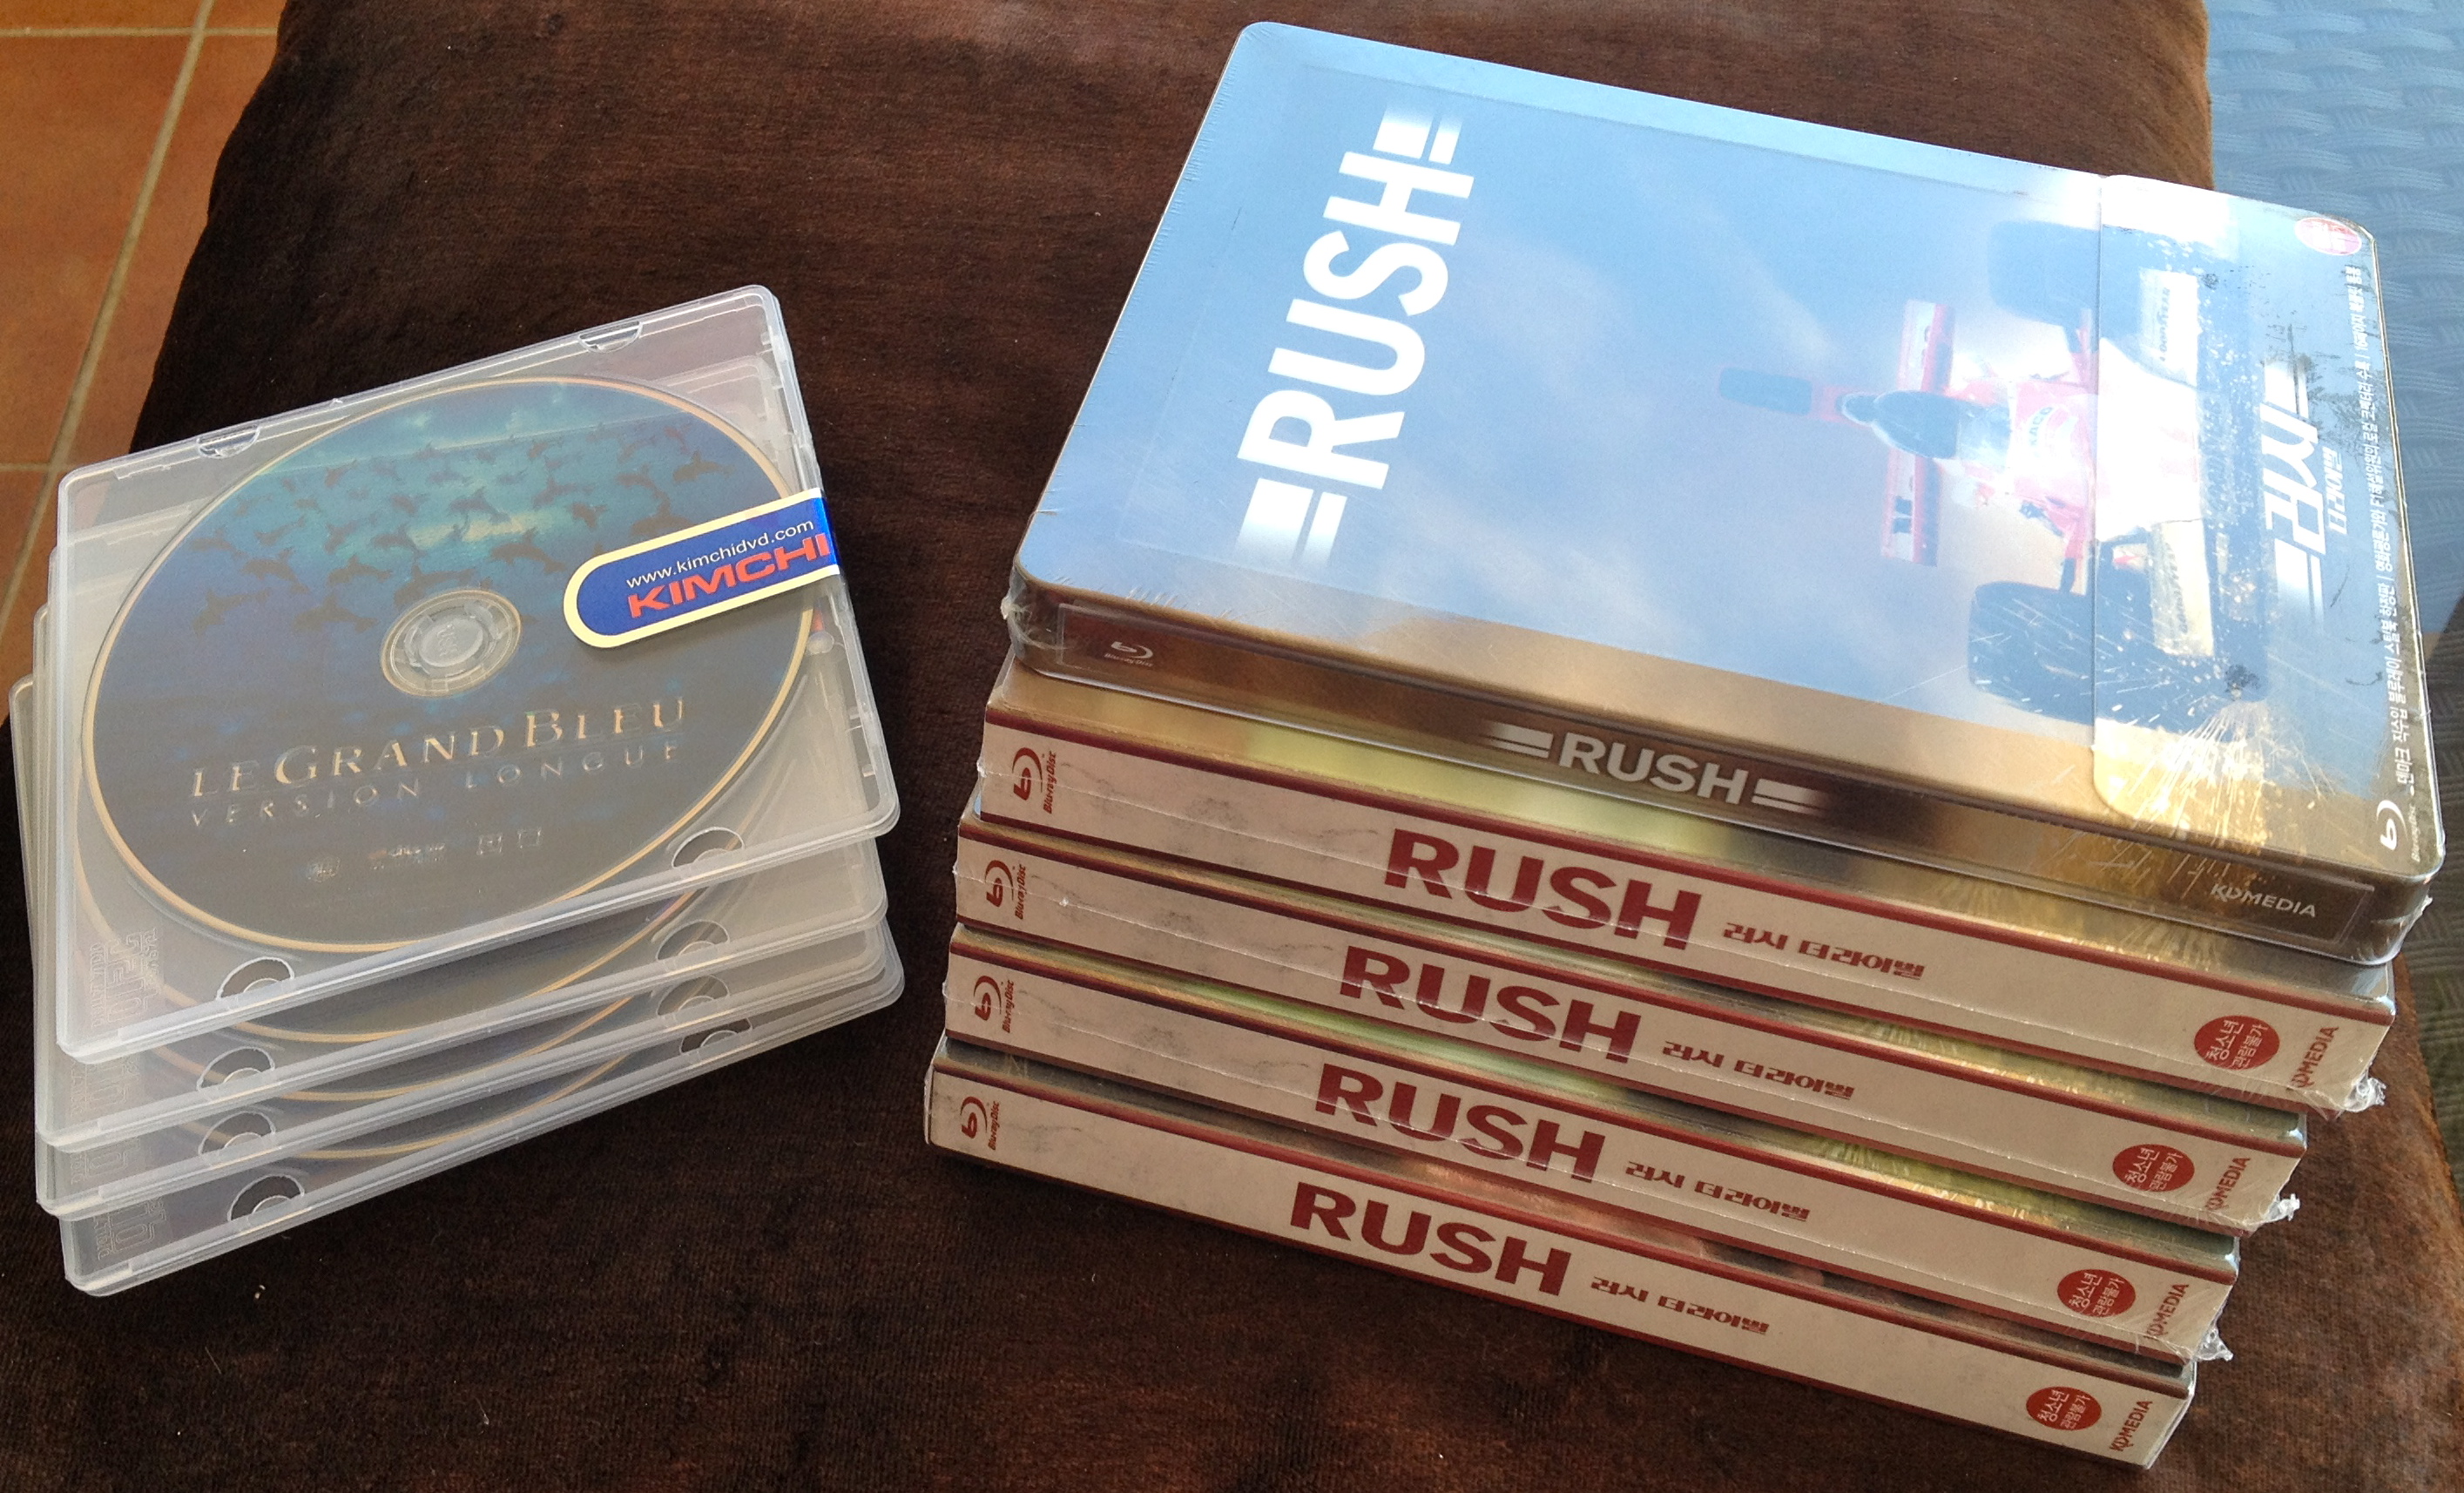 RUSH & LE GRAND BLEU REPLACEMENT DISCS JUST UNBOXED!